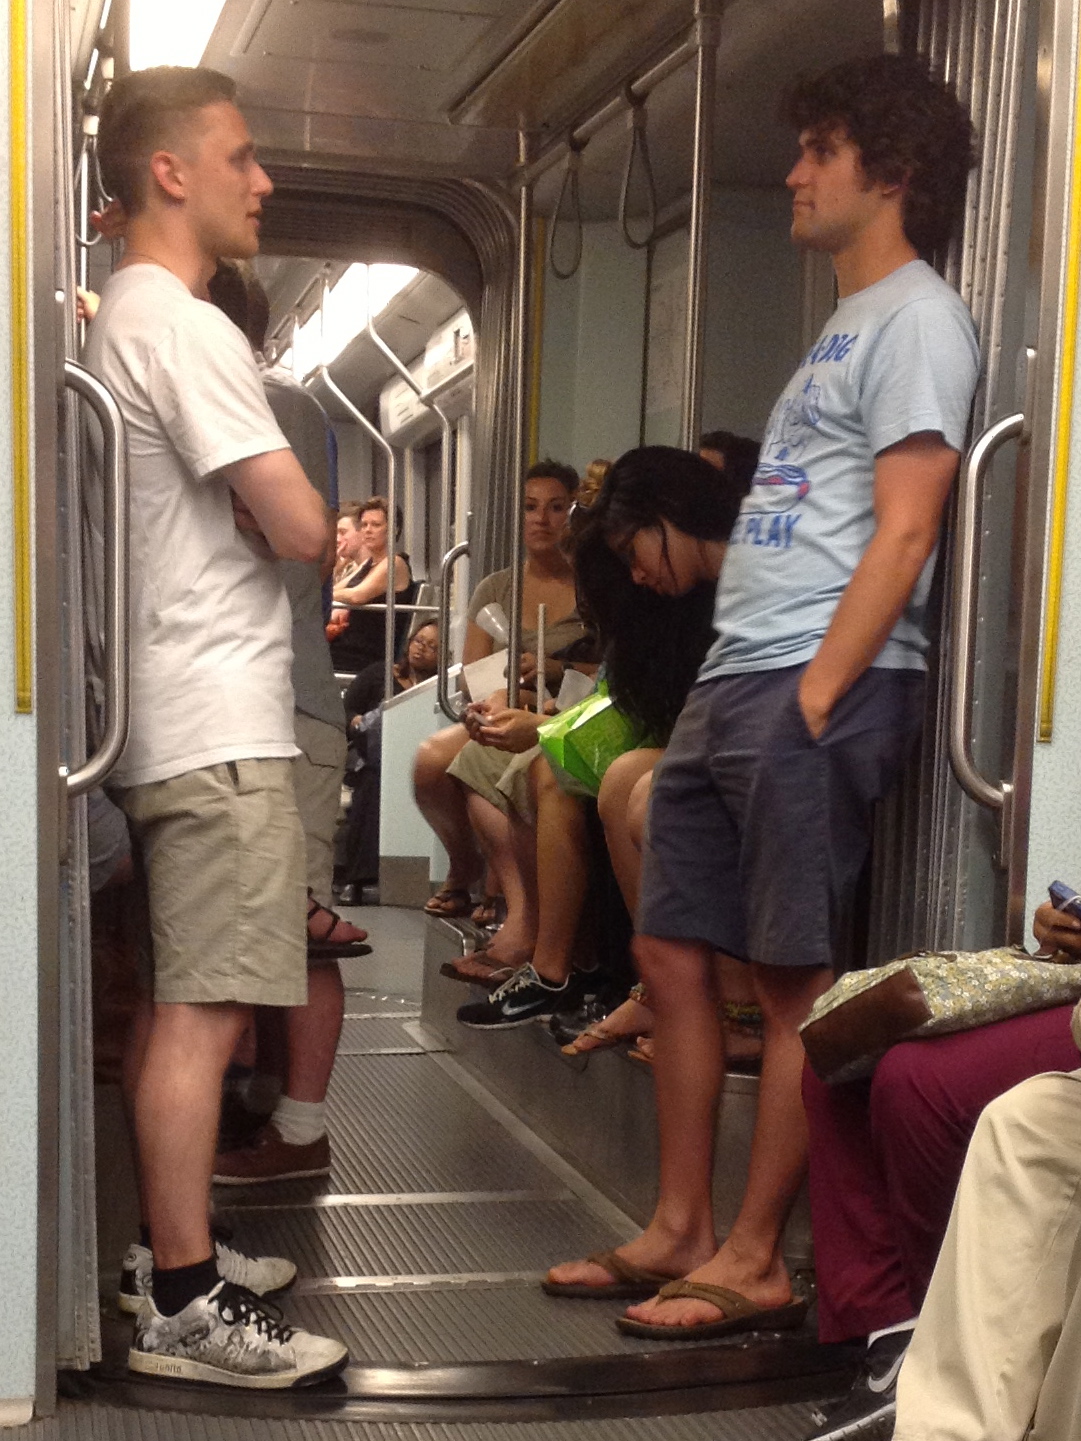 Hotties on the T!: Double Tuesday - Double Temptation